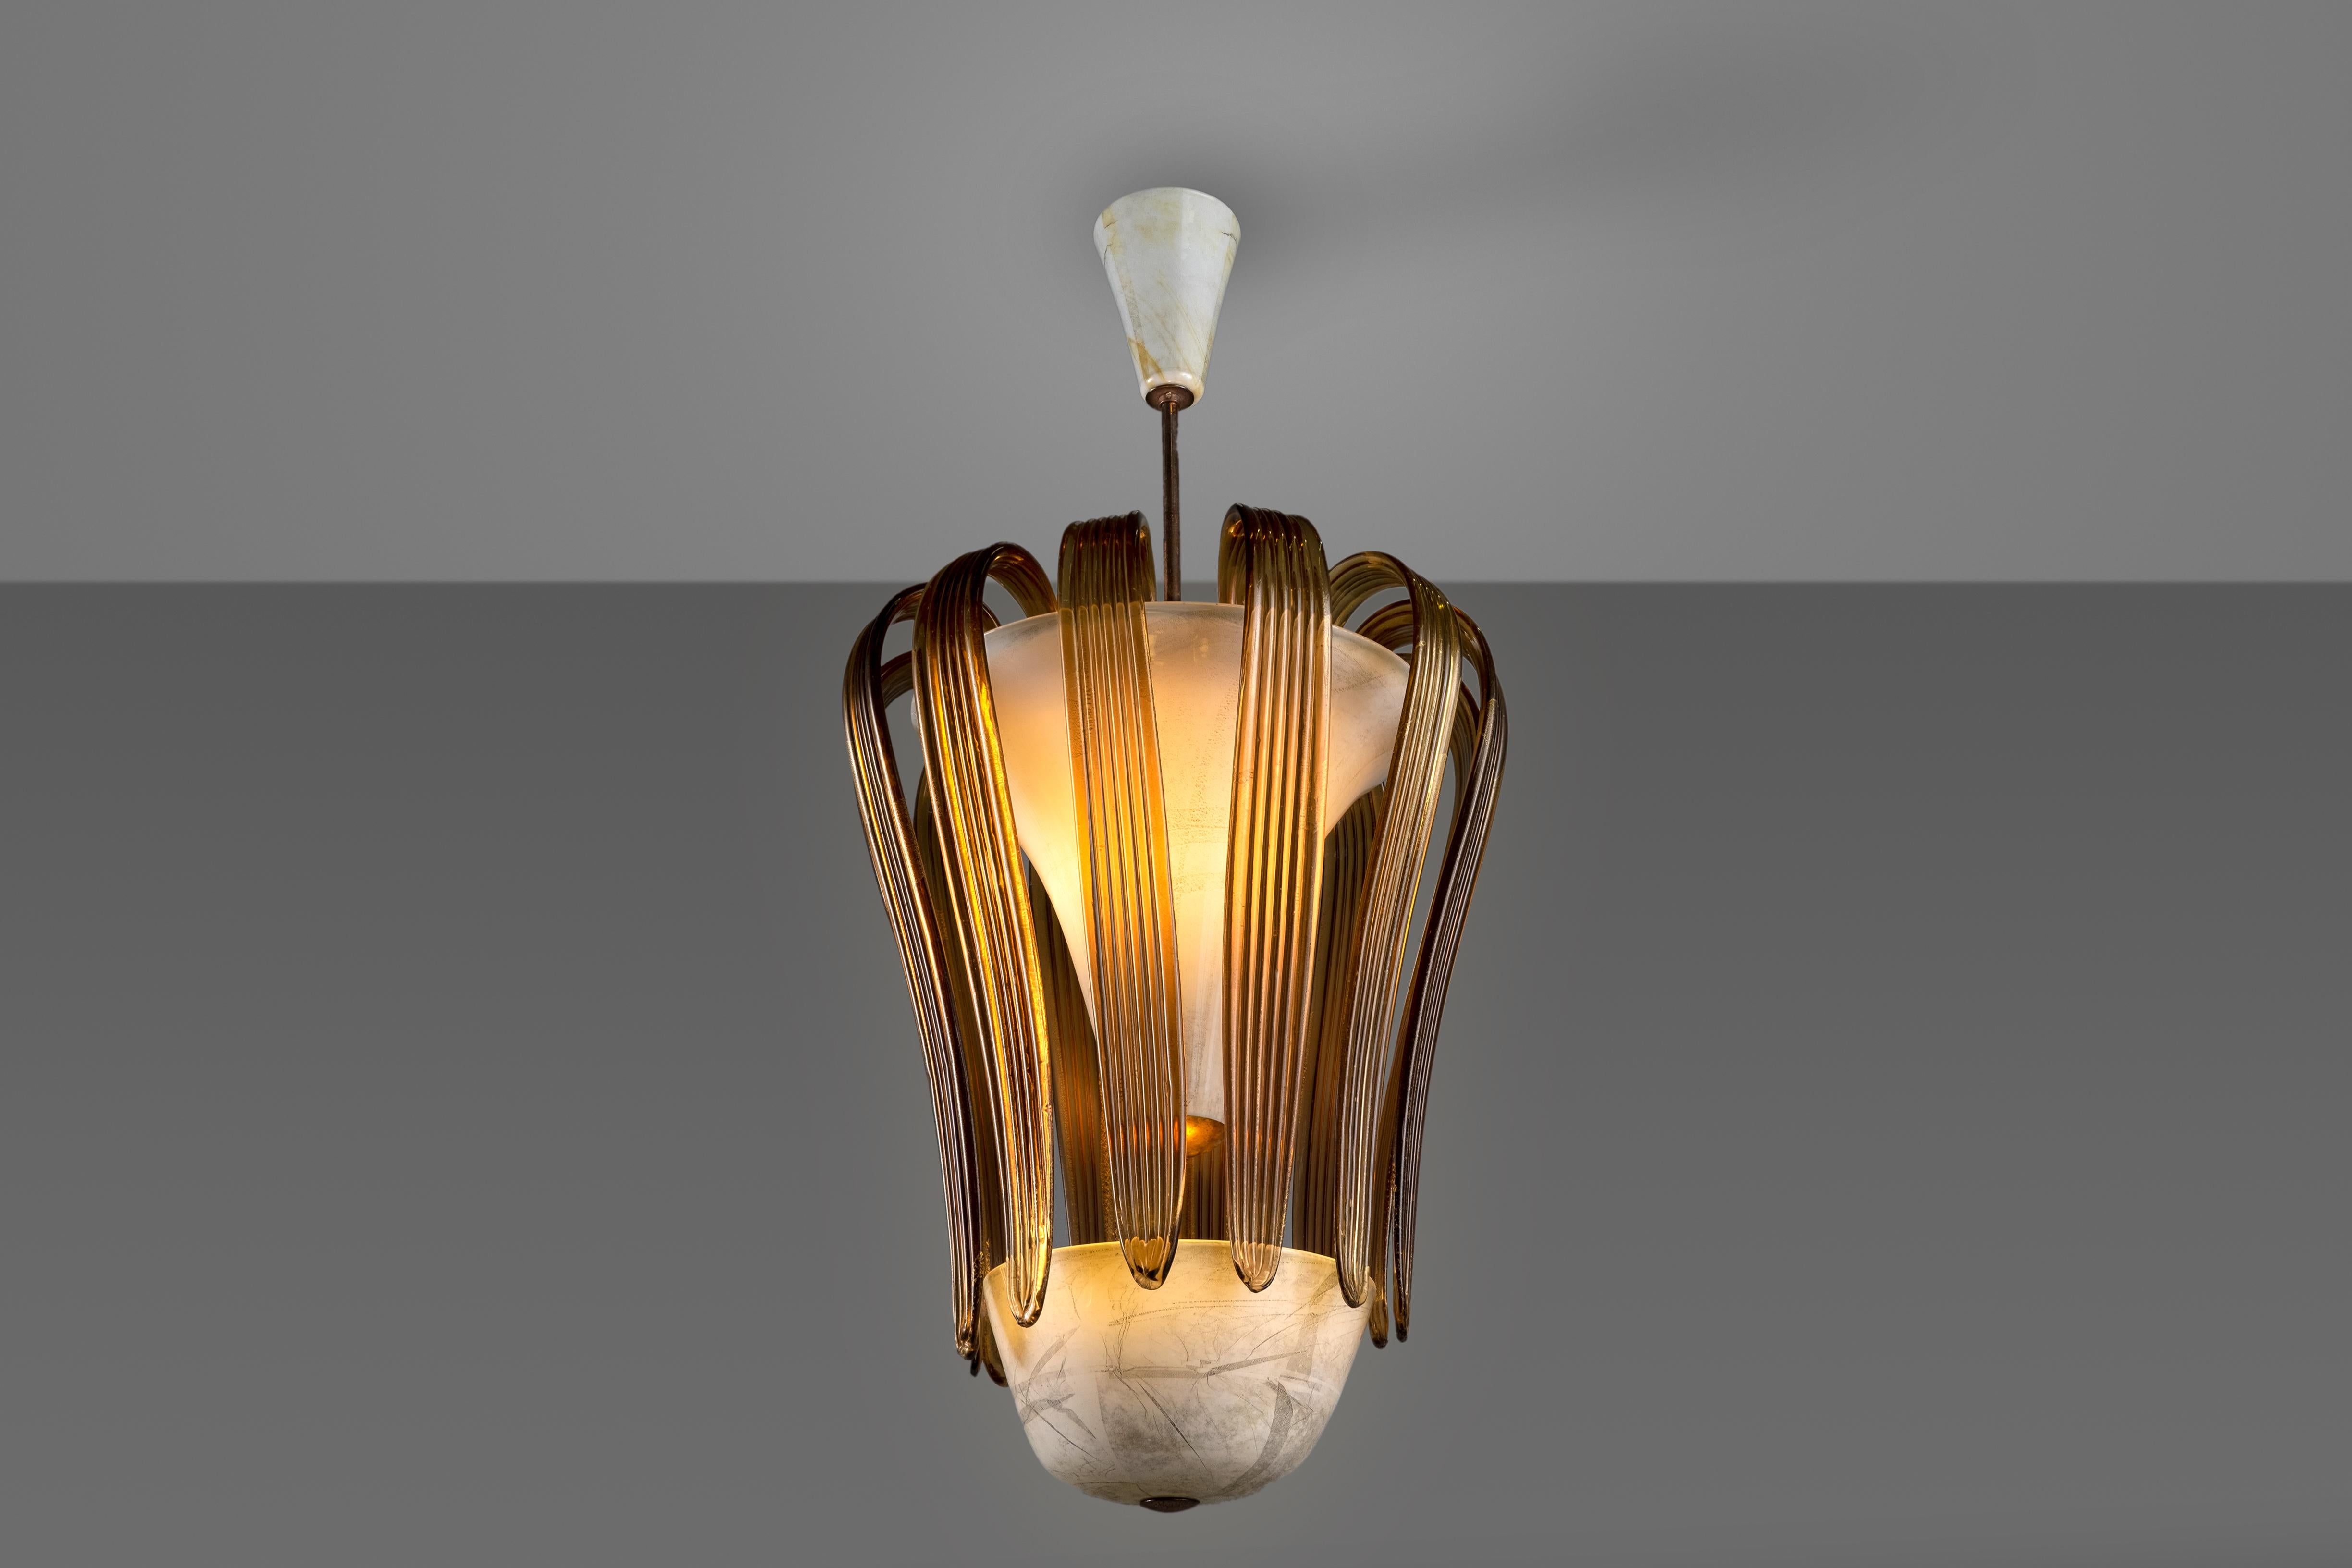 This amazing ceiling lamp designed by Tomaso Buzzi in the 30s for Venini. This item - the model 5204 - is made out entirely in Murano blown glass with diffusers in 'lattimo' (milk glass), silver and elements in creased stained glass. Its beauty and